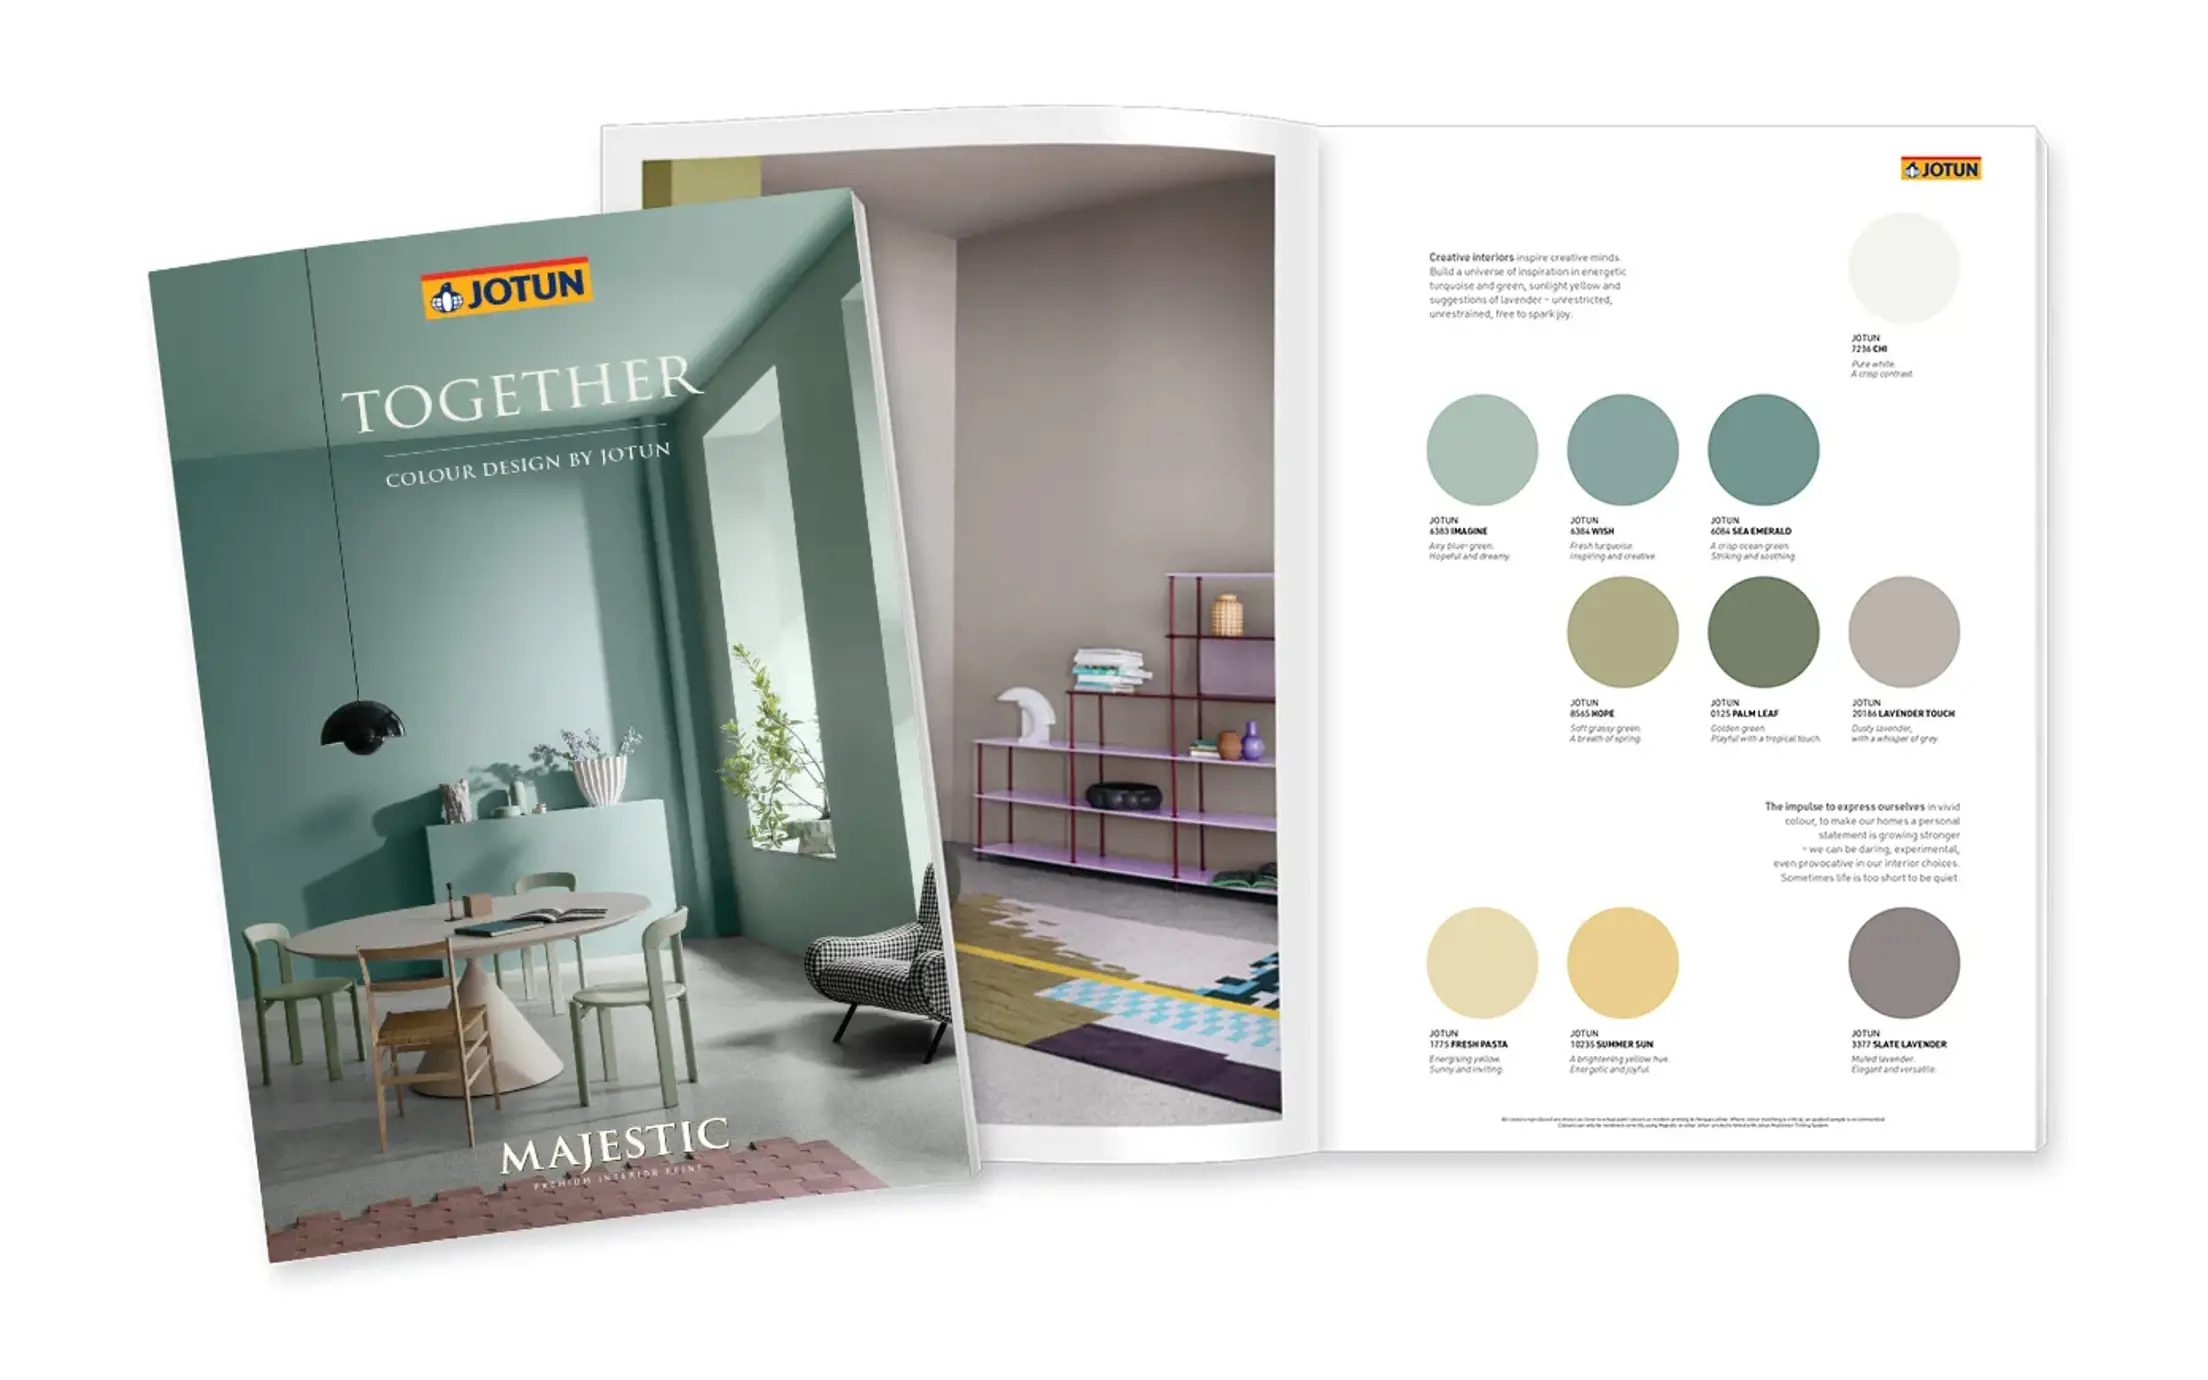 Preview of a digital Together colour design by Jotun brochure